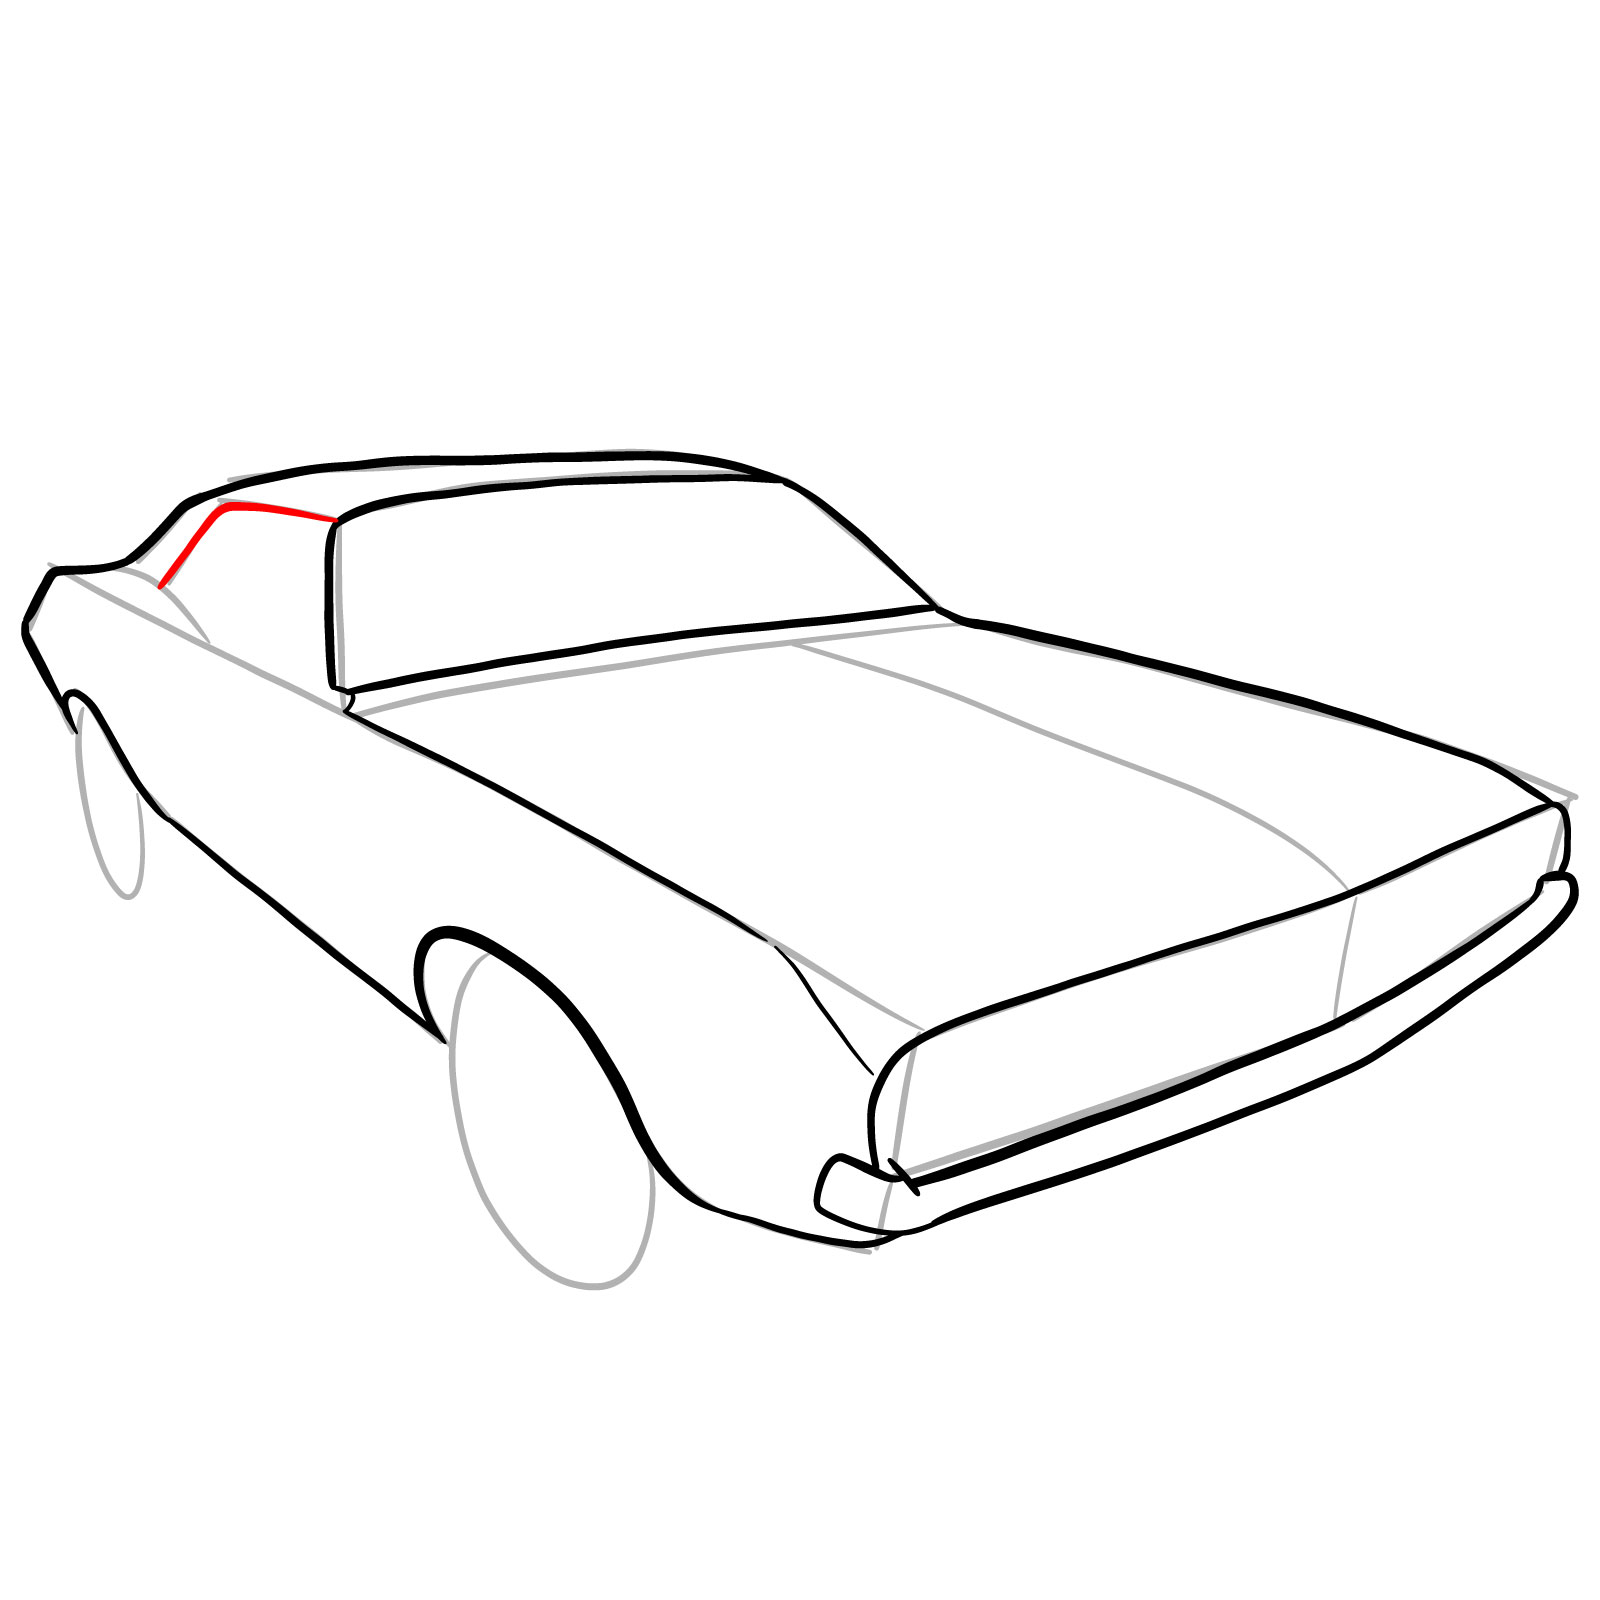 How to draw Dodge Challenger 1970 - step 14